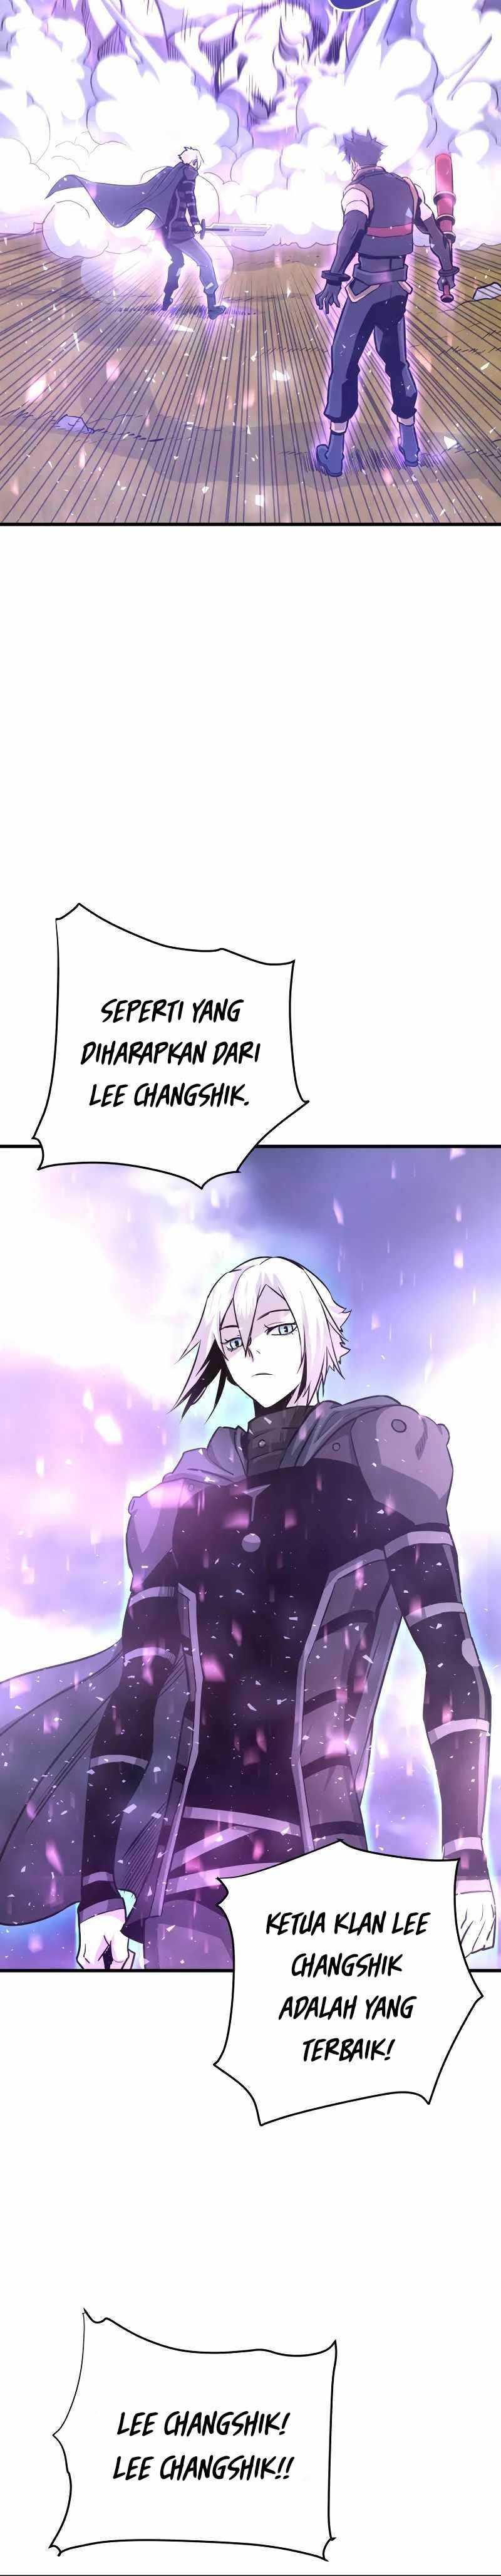 Han Dae Sung Returned From Hell Chapter 49 22